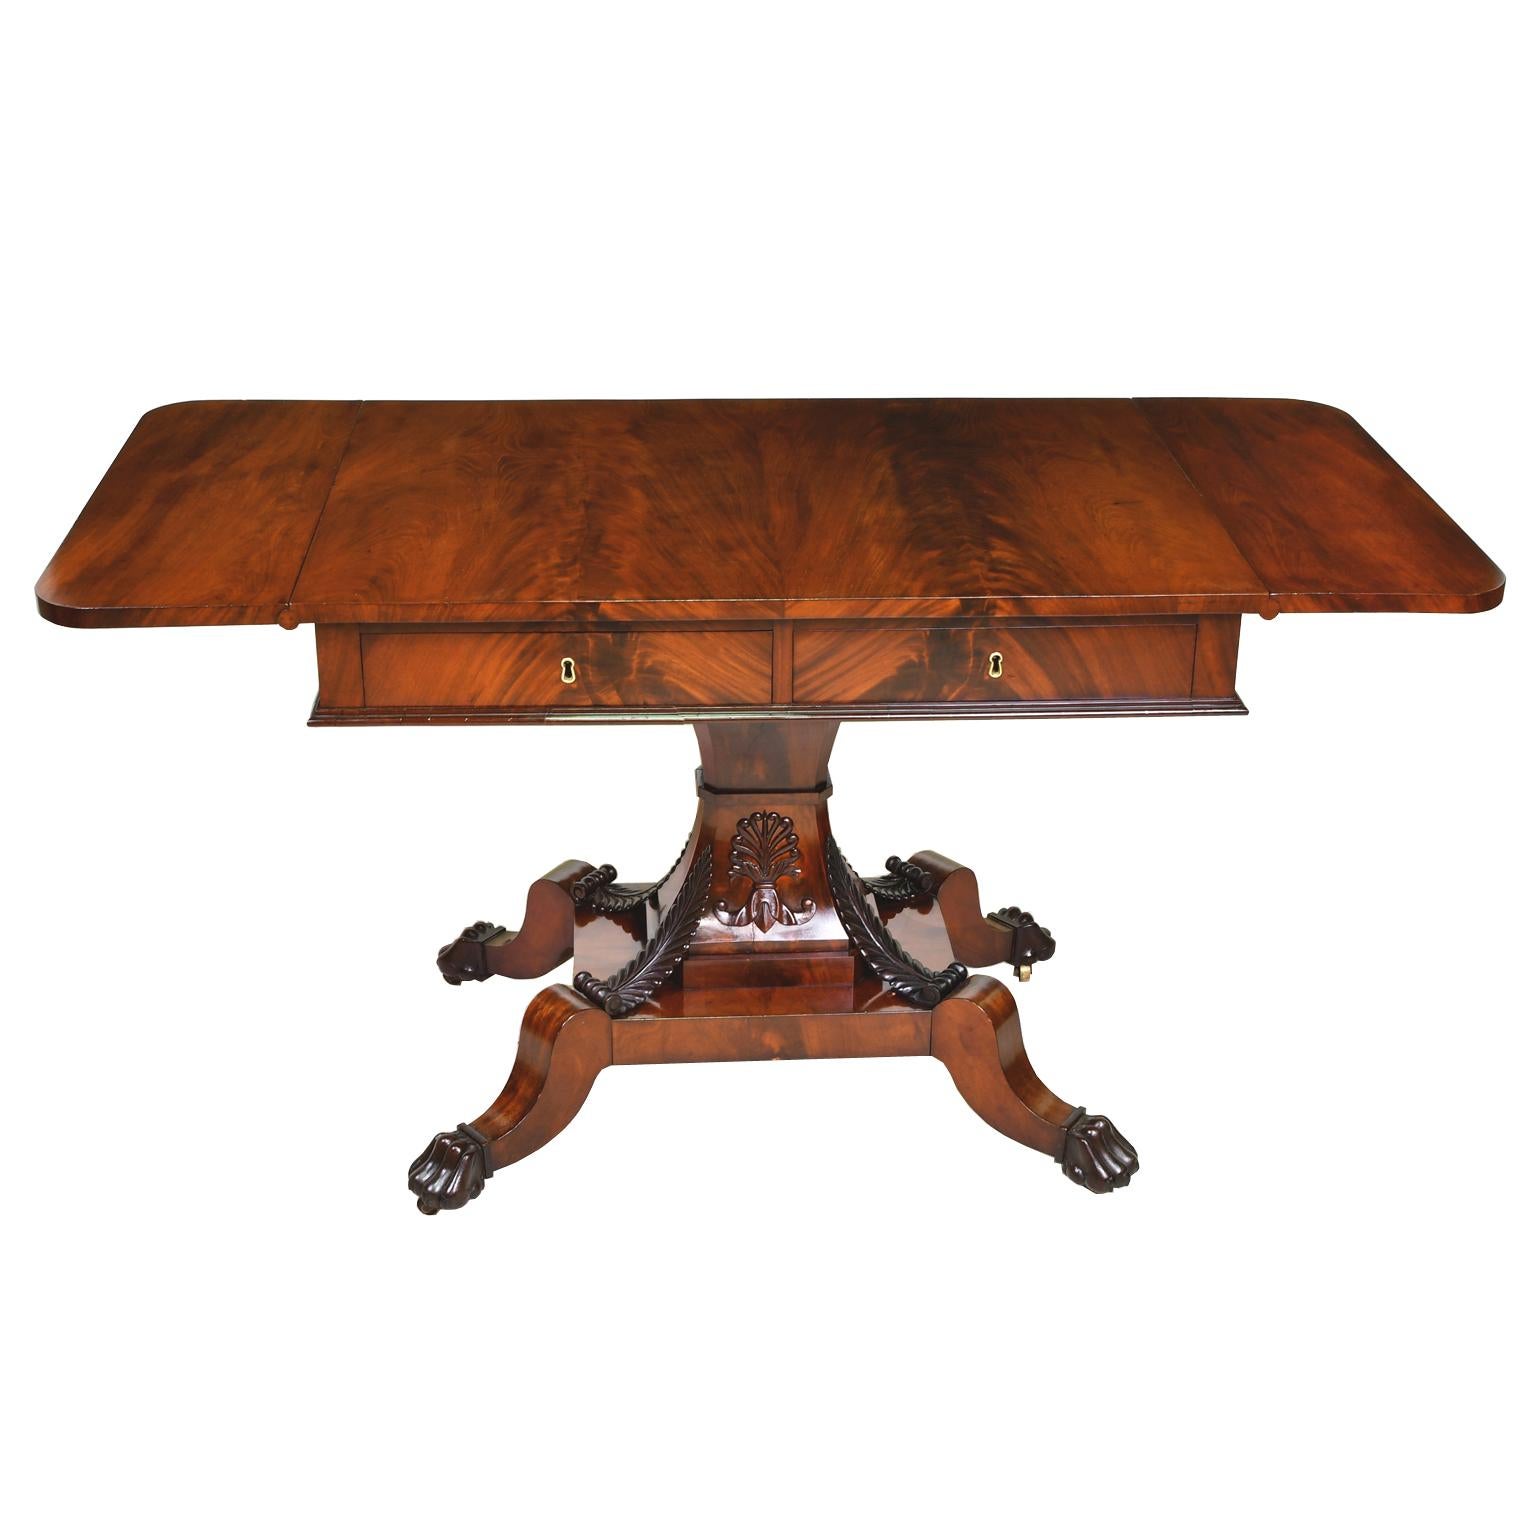 Hand-Carved  Swedish Karl Johan Salon/Sofa Table or Desk in West Indies Mahogany, c. 1825 For Sale